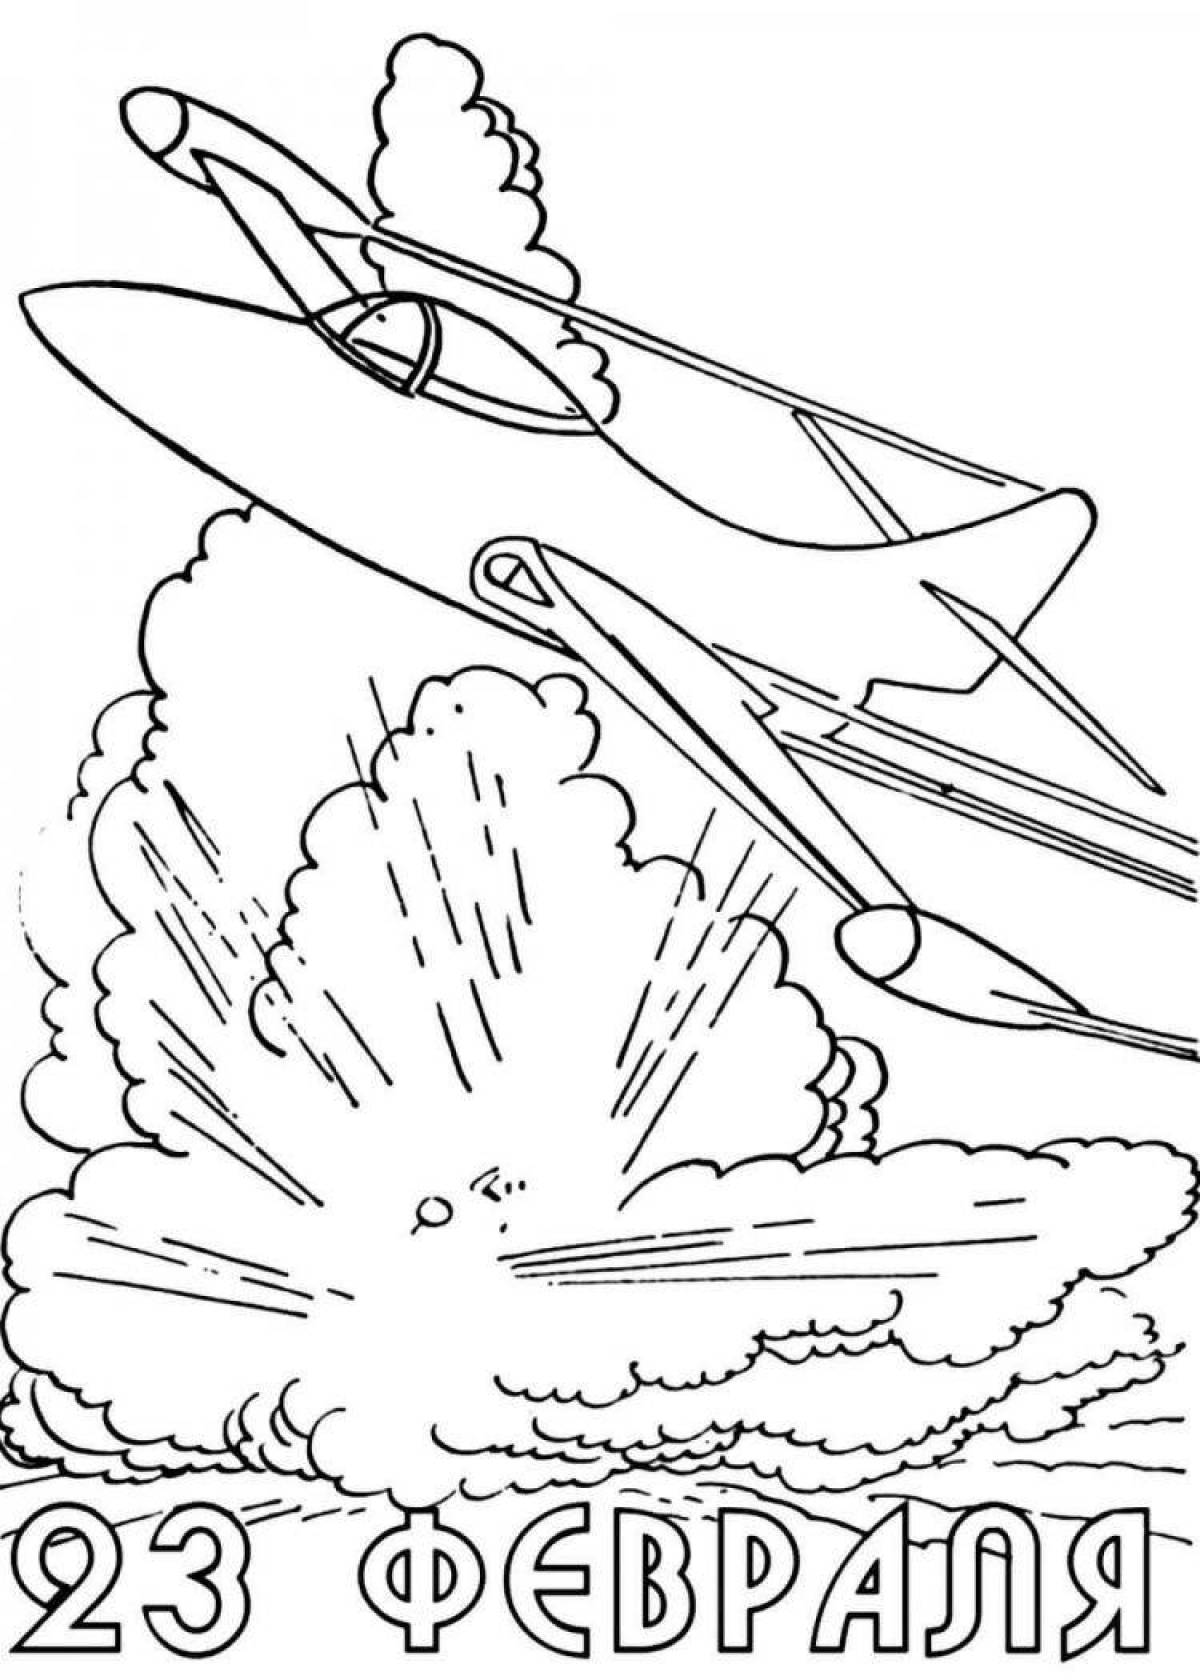 Animated Defender's Day coloring page